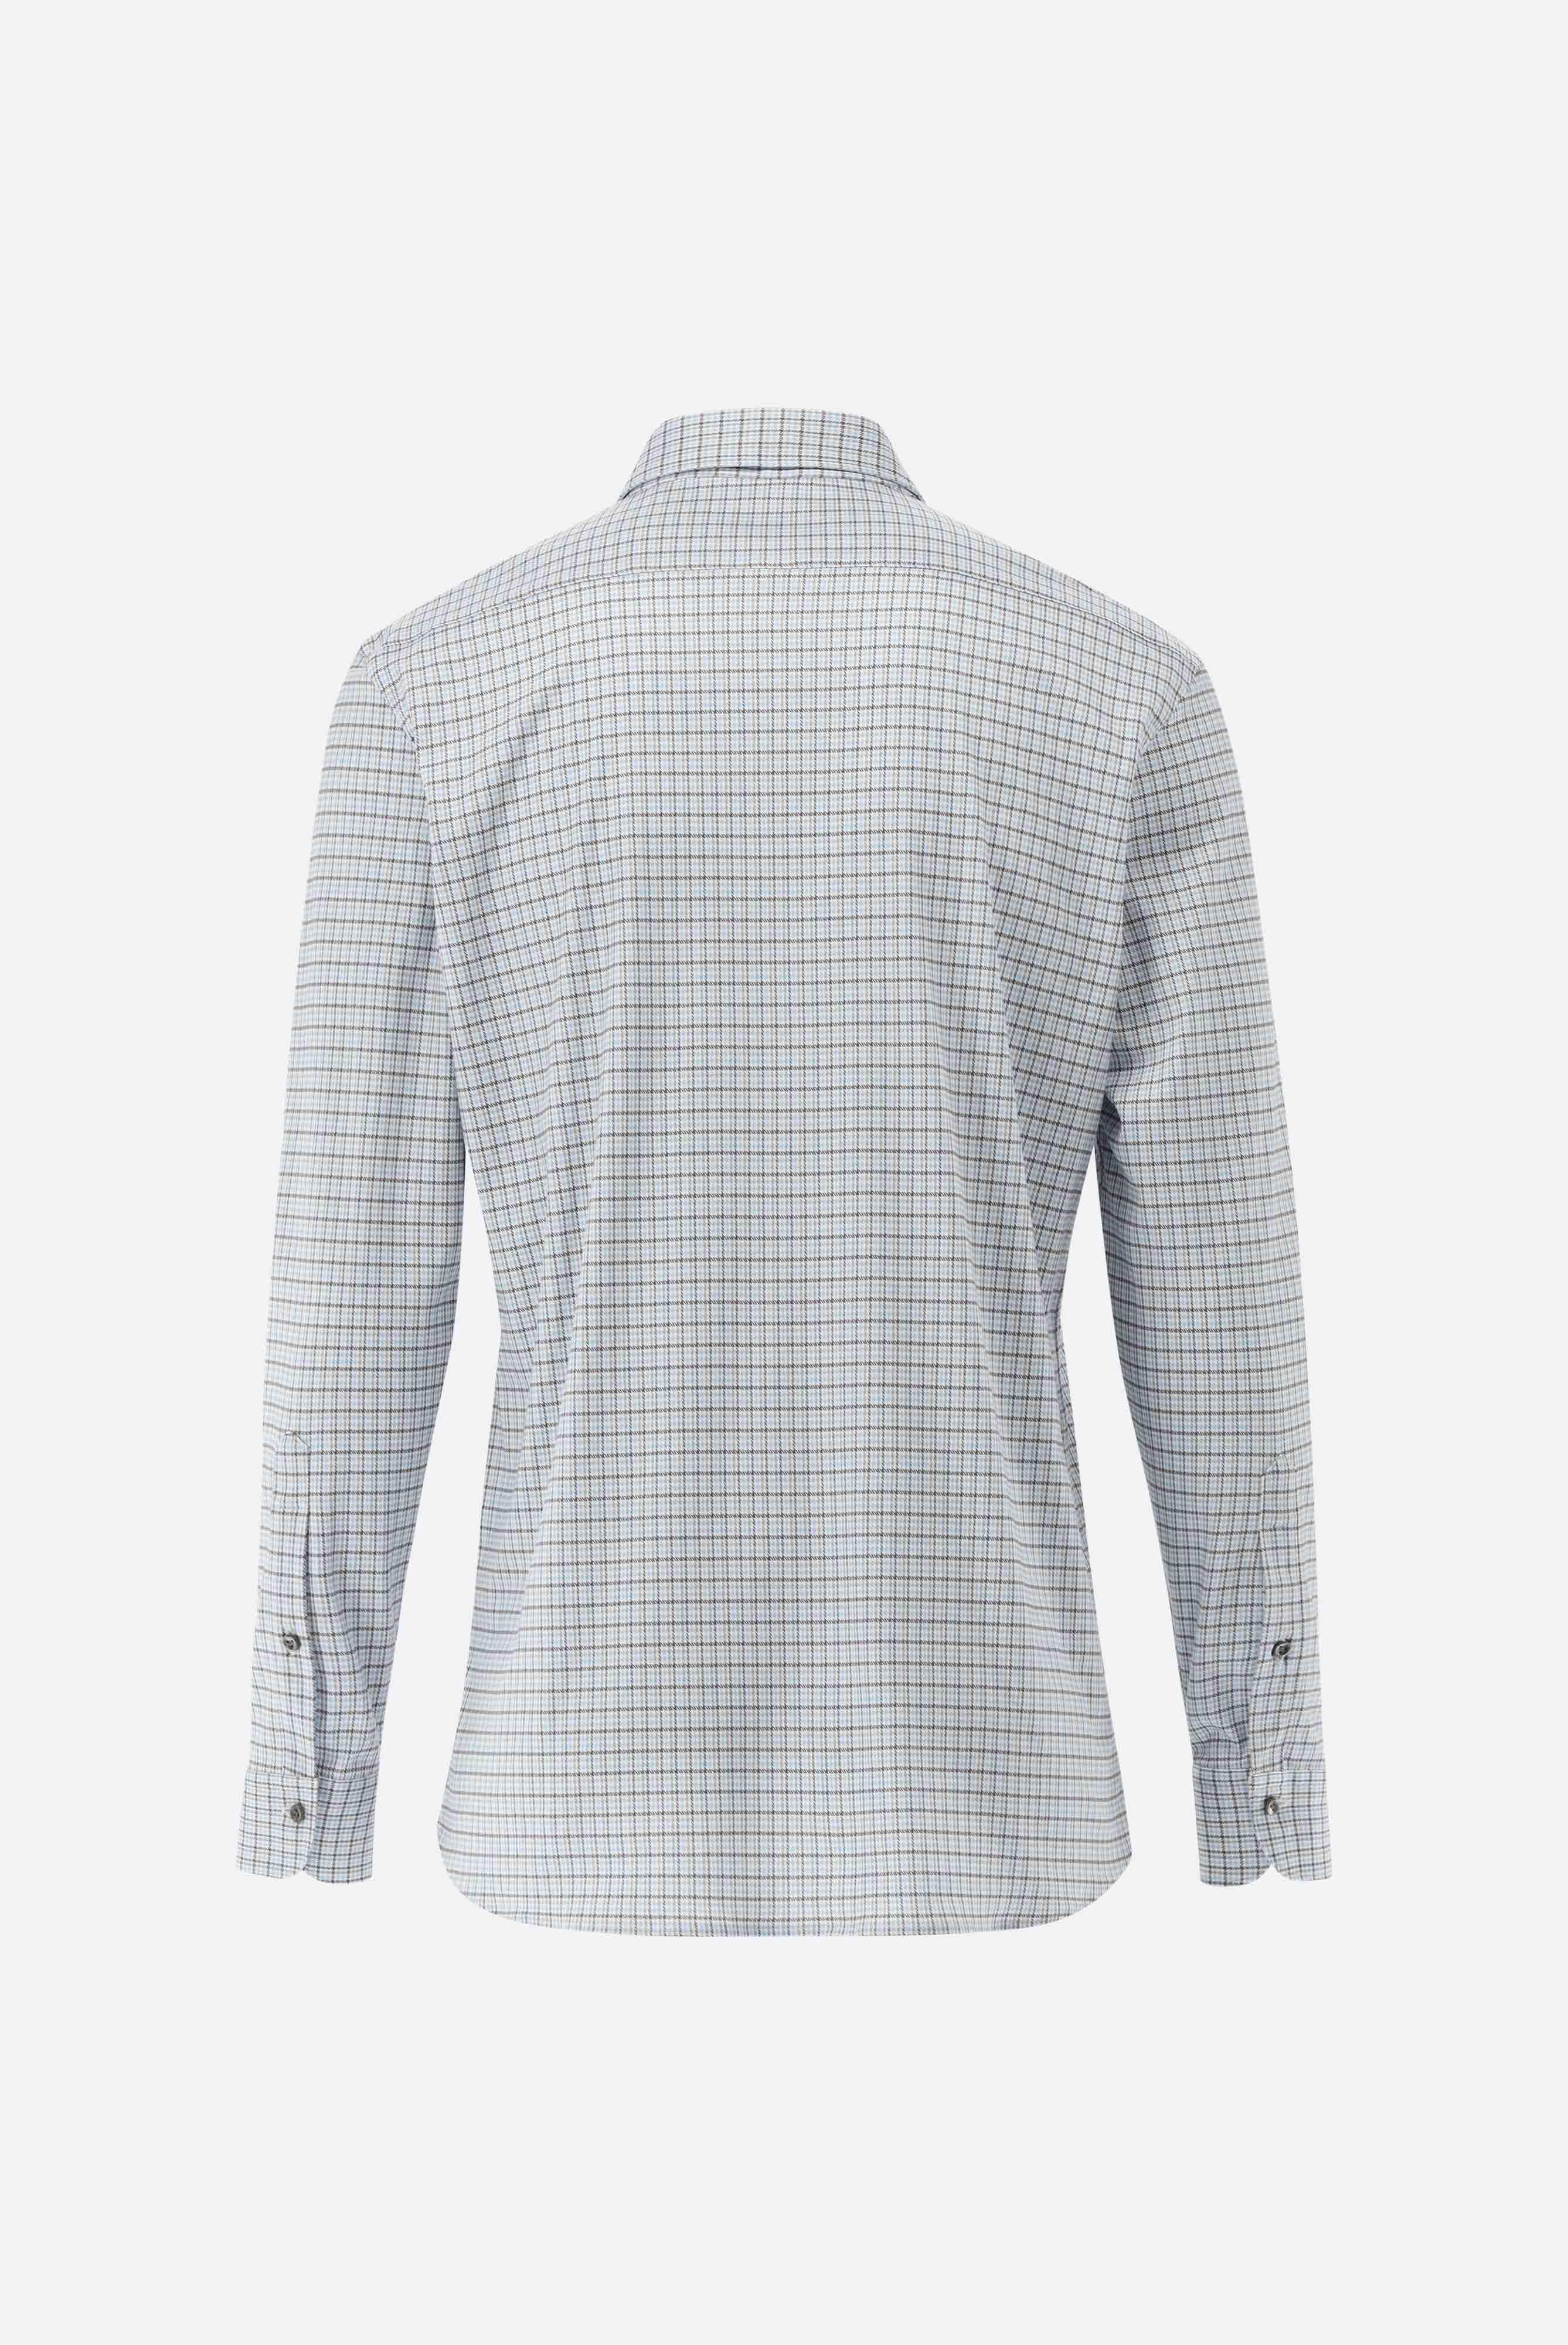 Jersey shirt made of Swiss cotton with structure